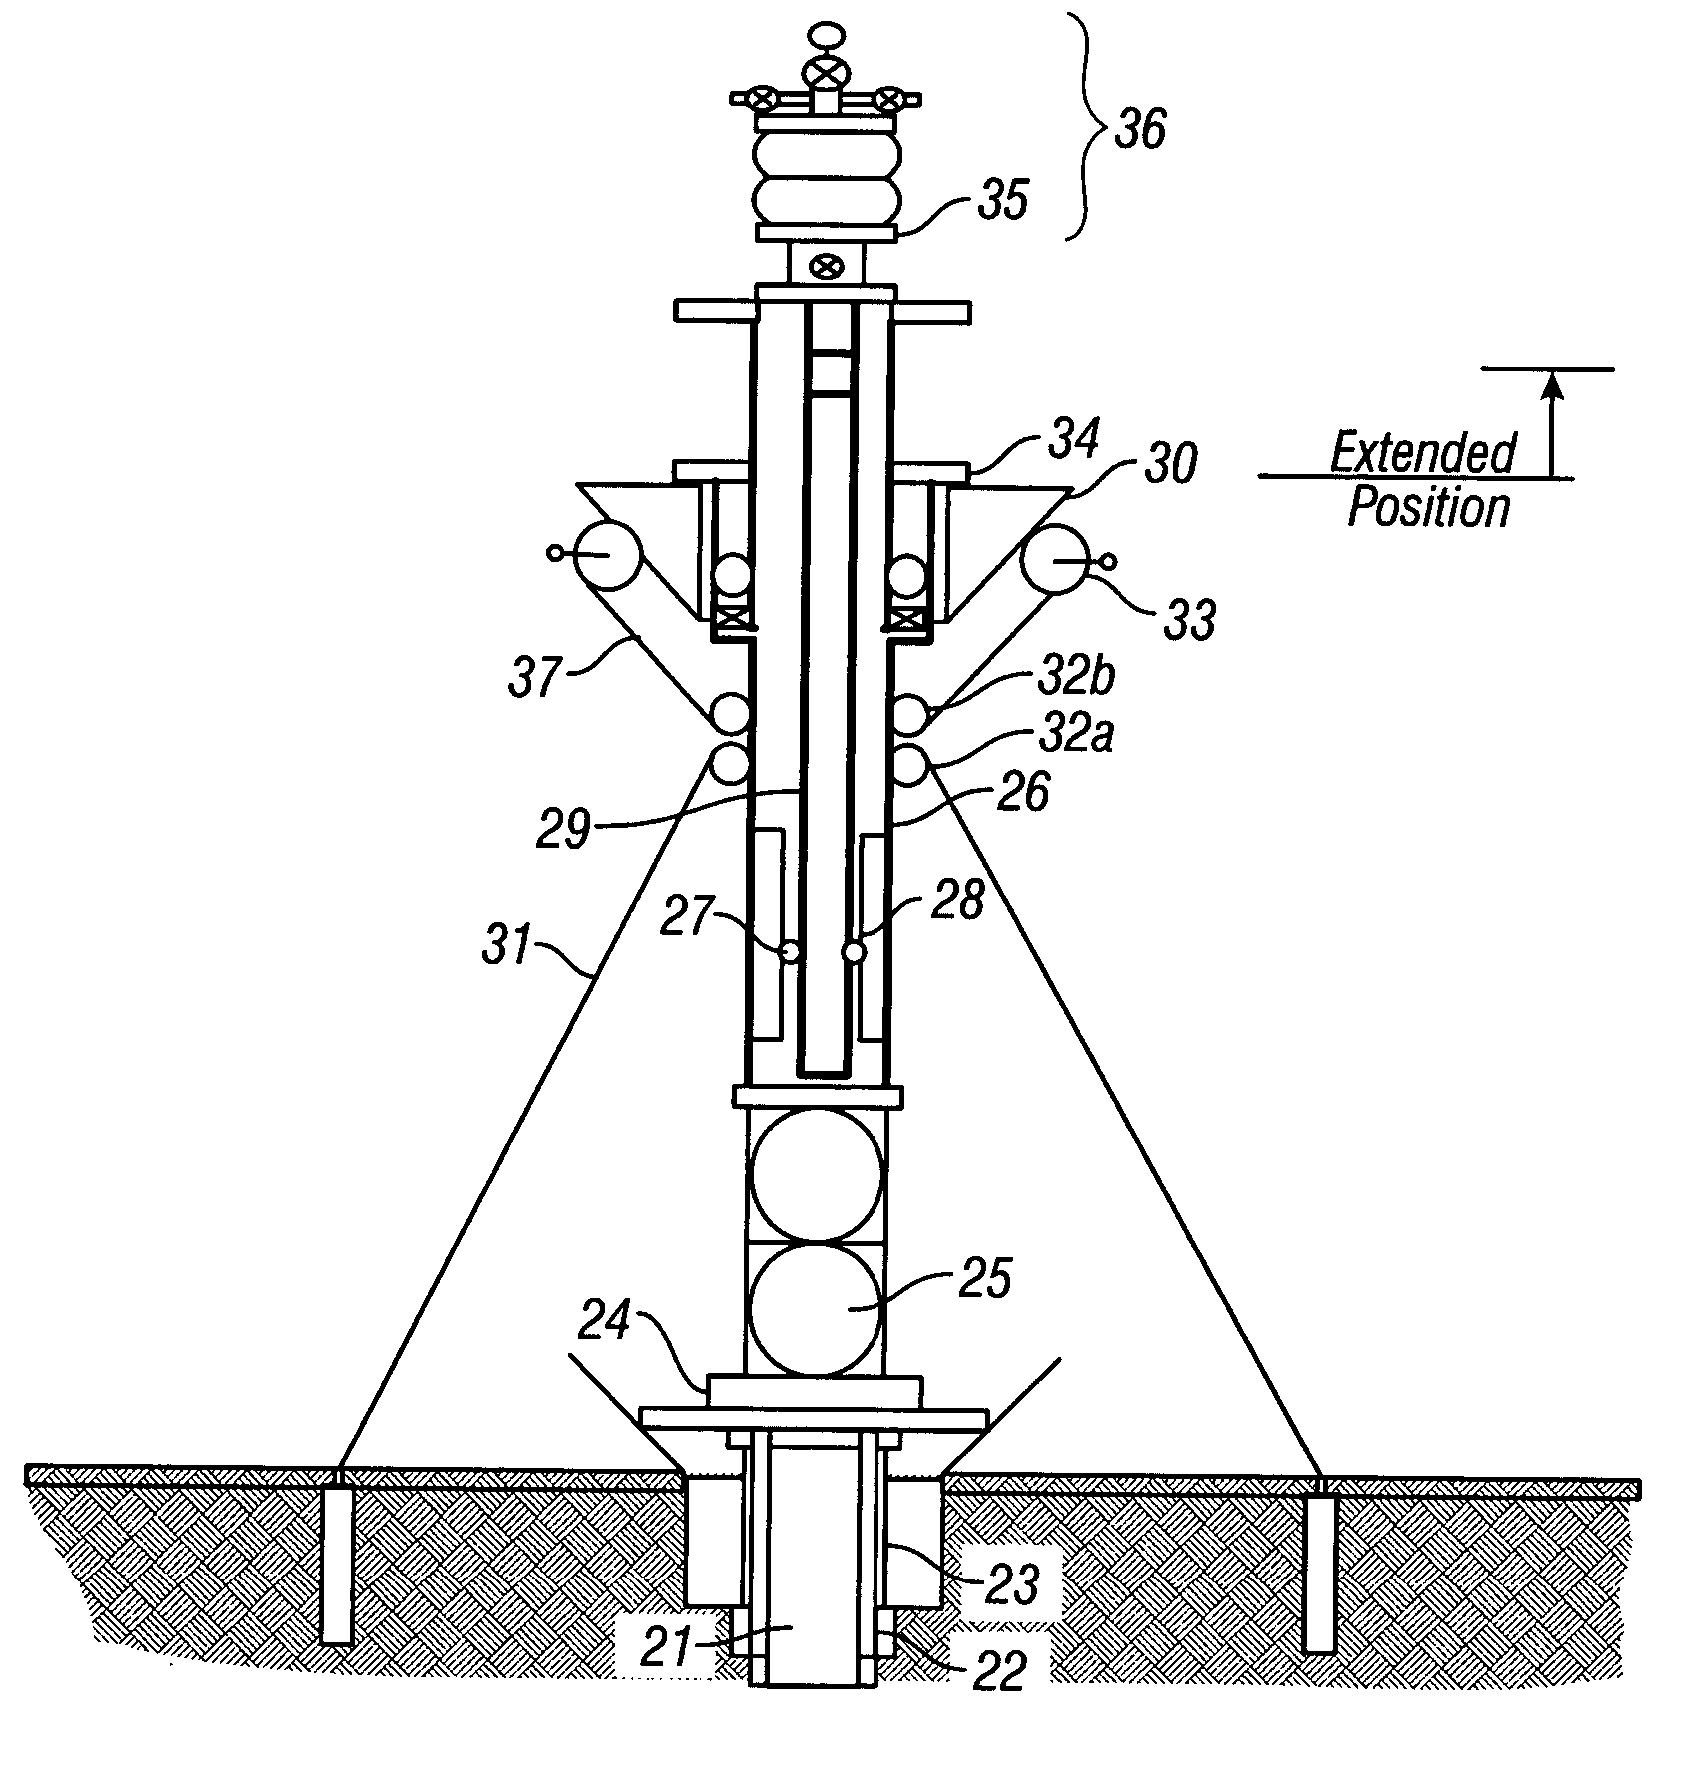 System and method of installing and maintaining an offshore exploration and production system having an adjustable buoyancy chamber